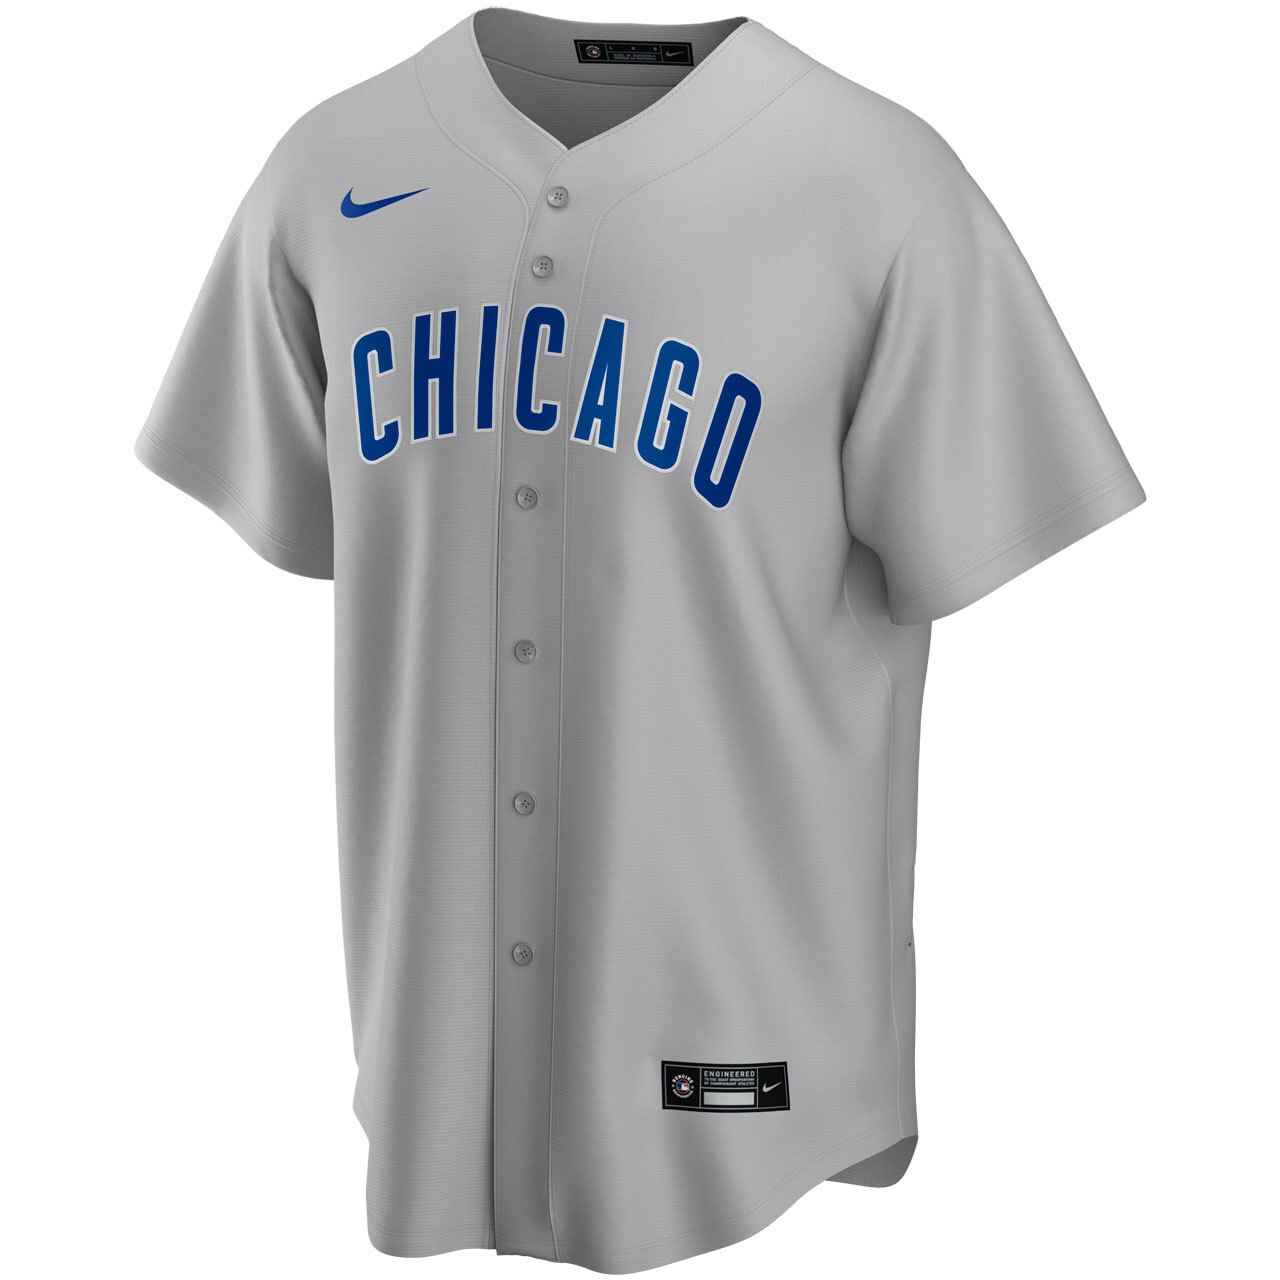 Chicago Cubs 2020 Replica Road Jersey 